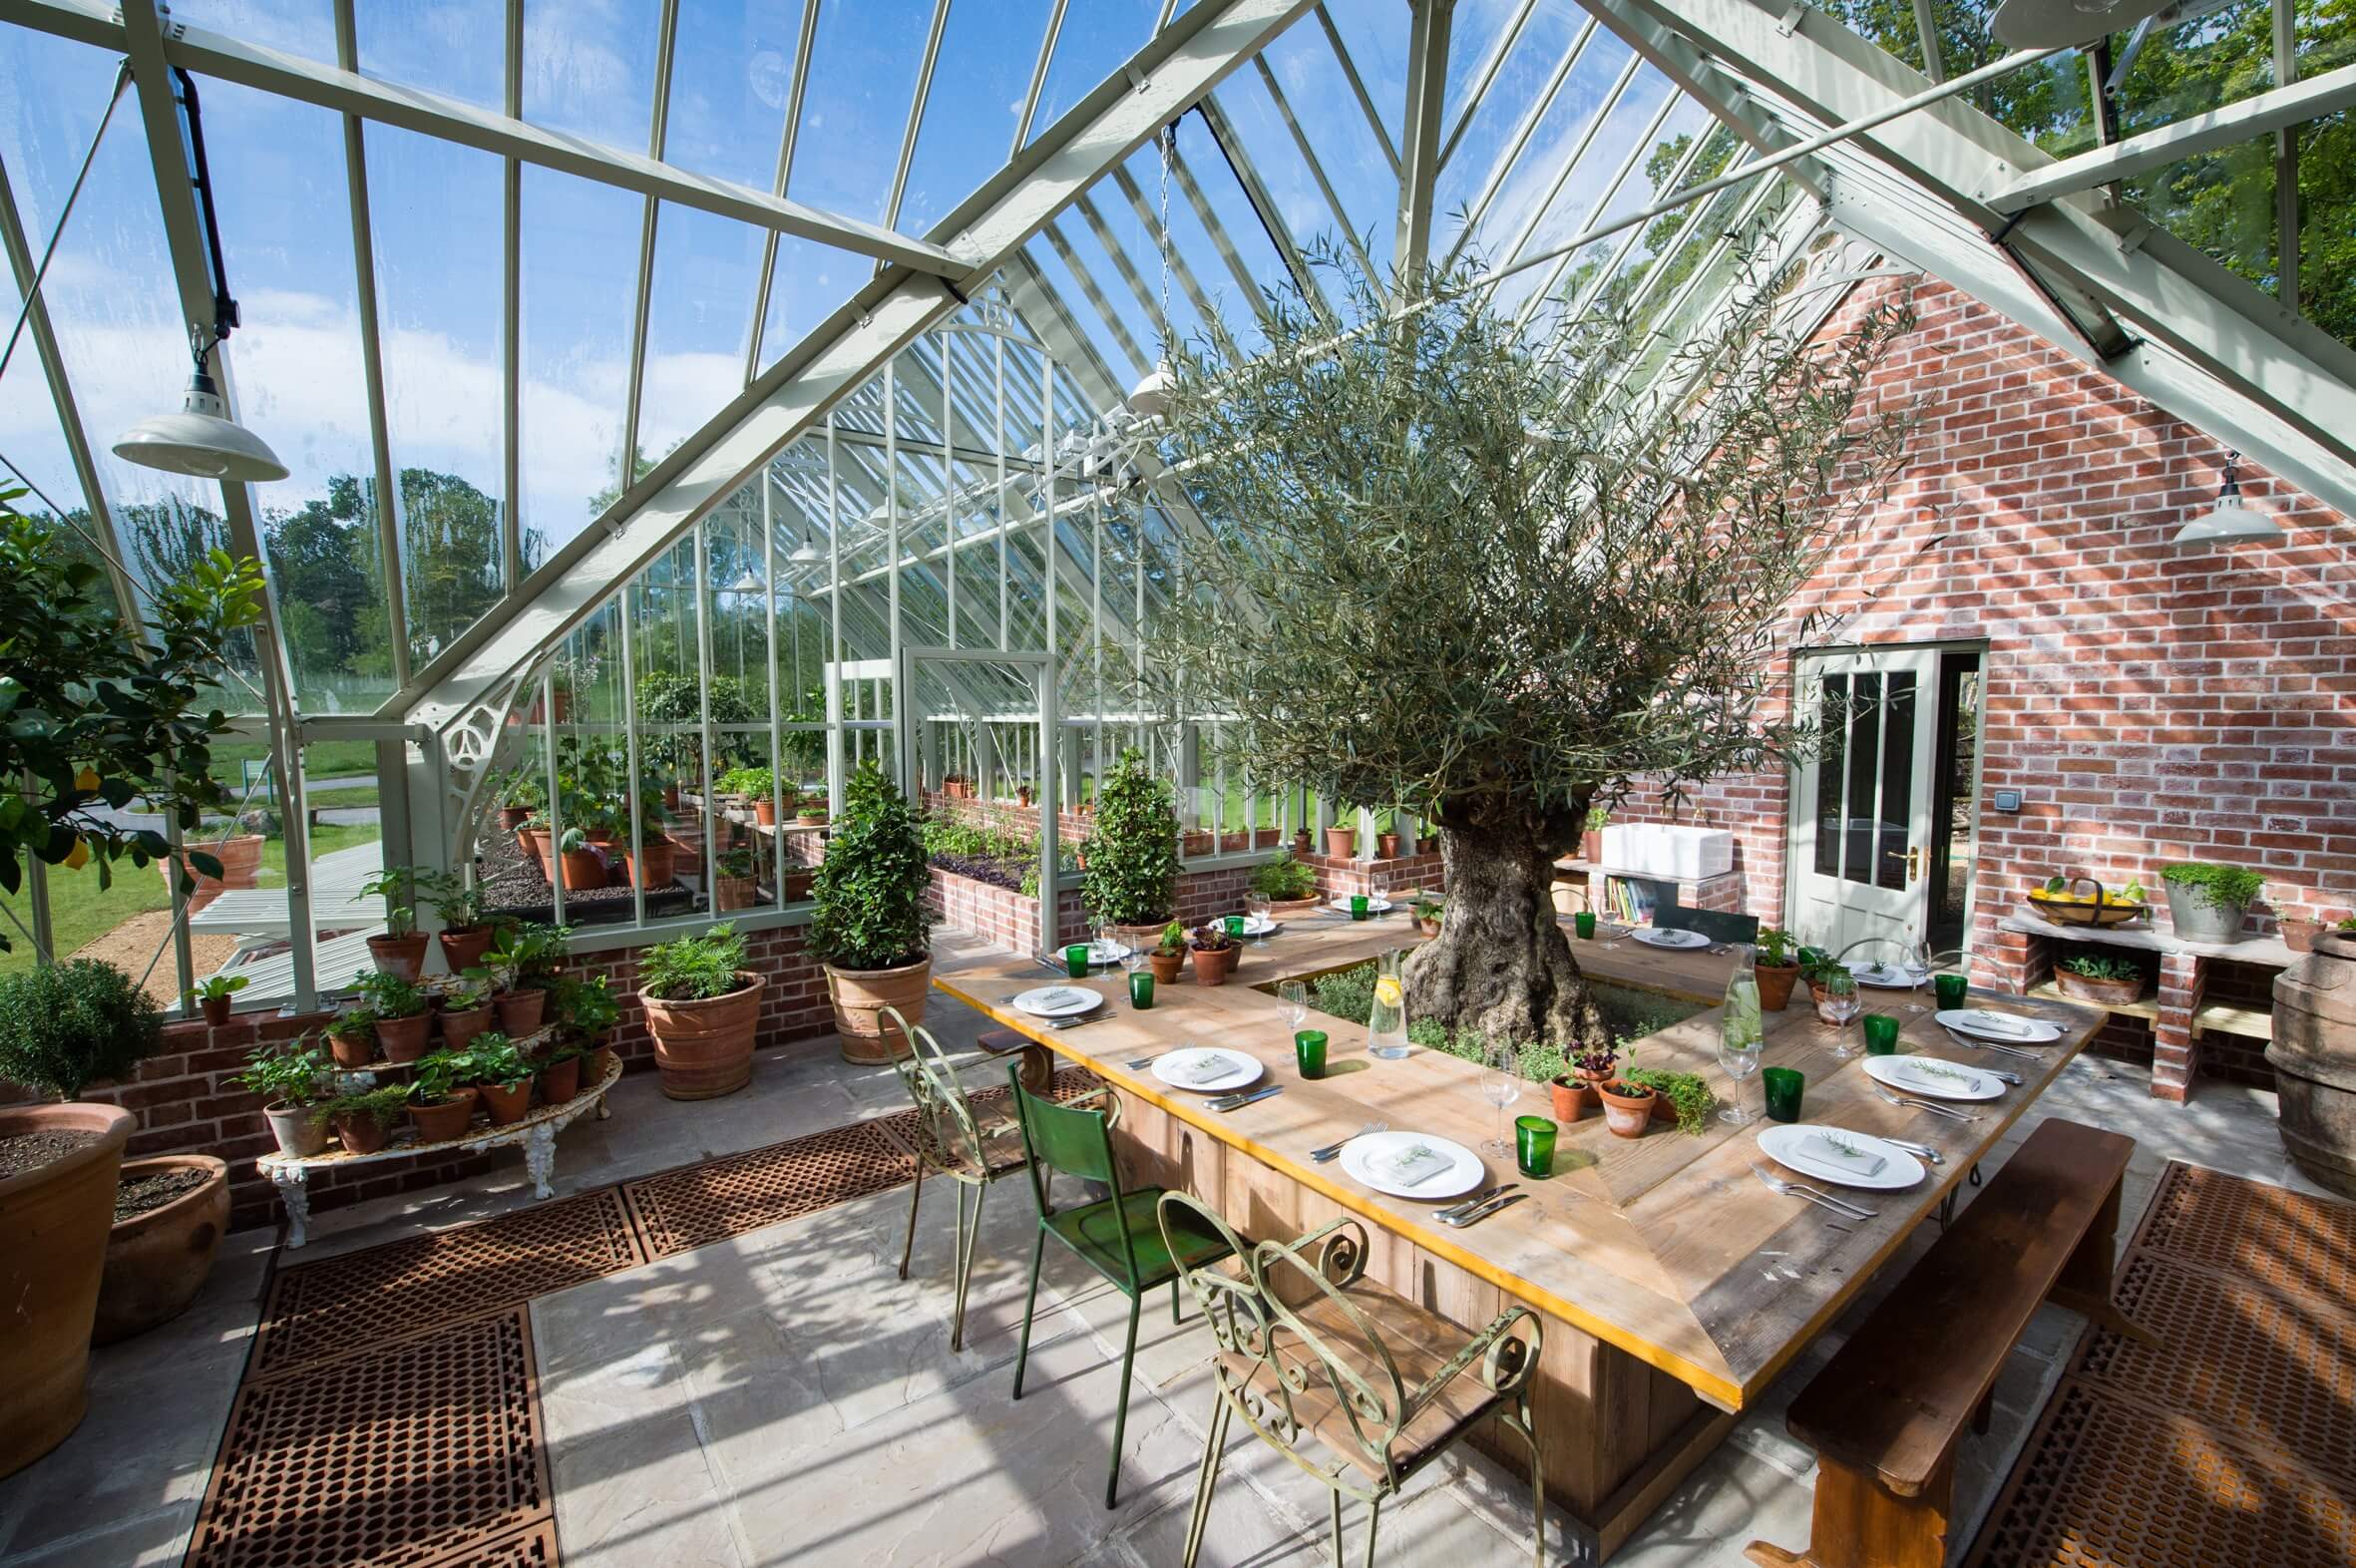 Inside the Lime Wood greenhouse | Photo credit: Amy Murrell